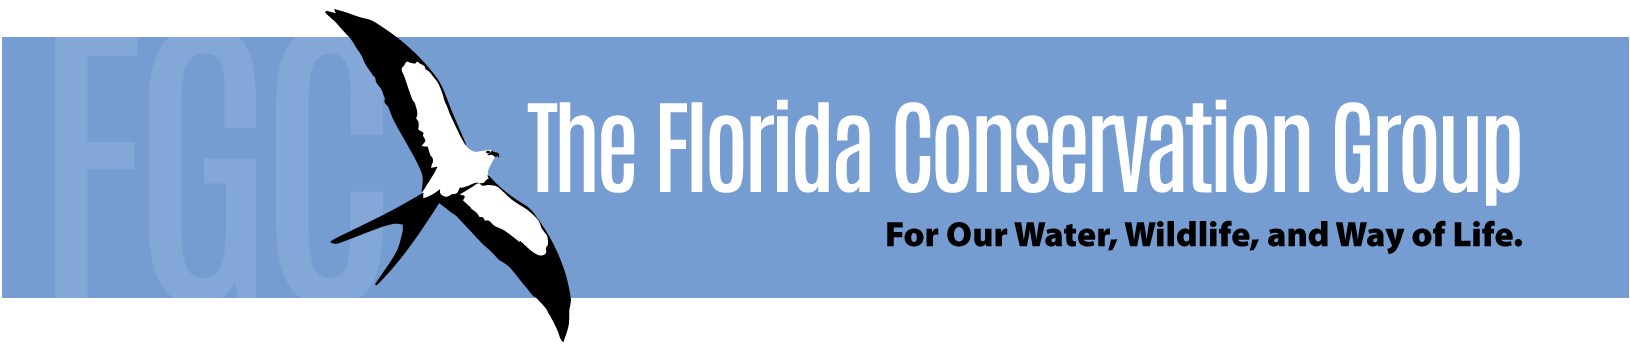 florida conservation group